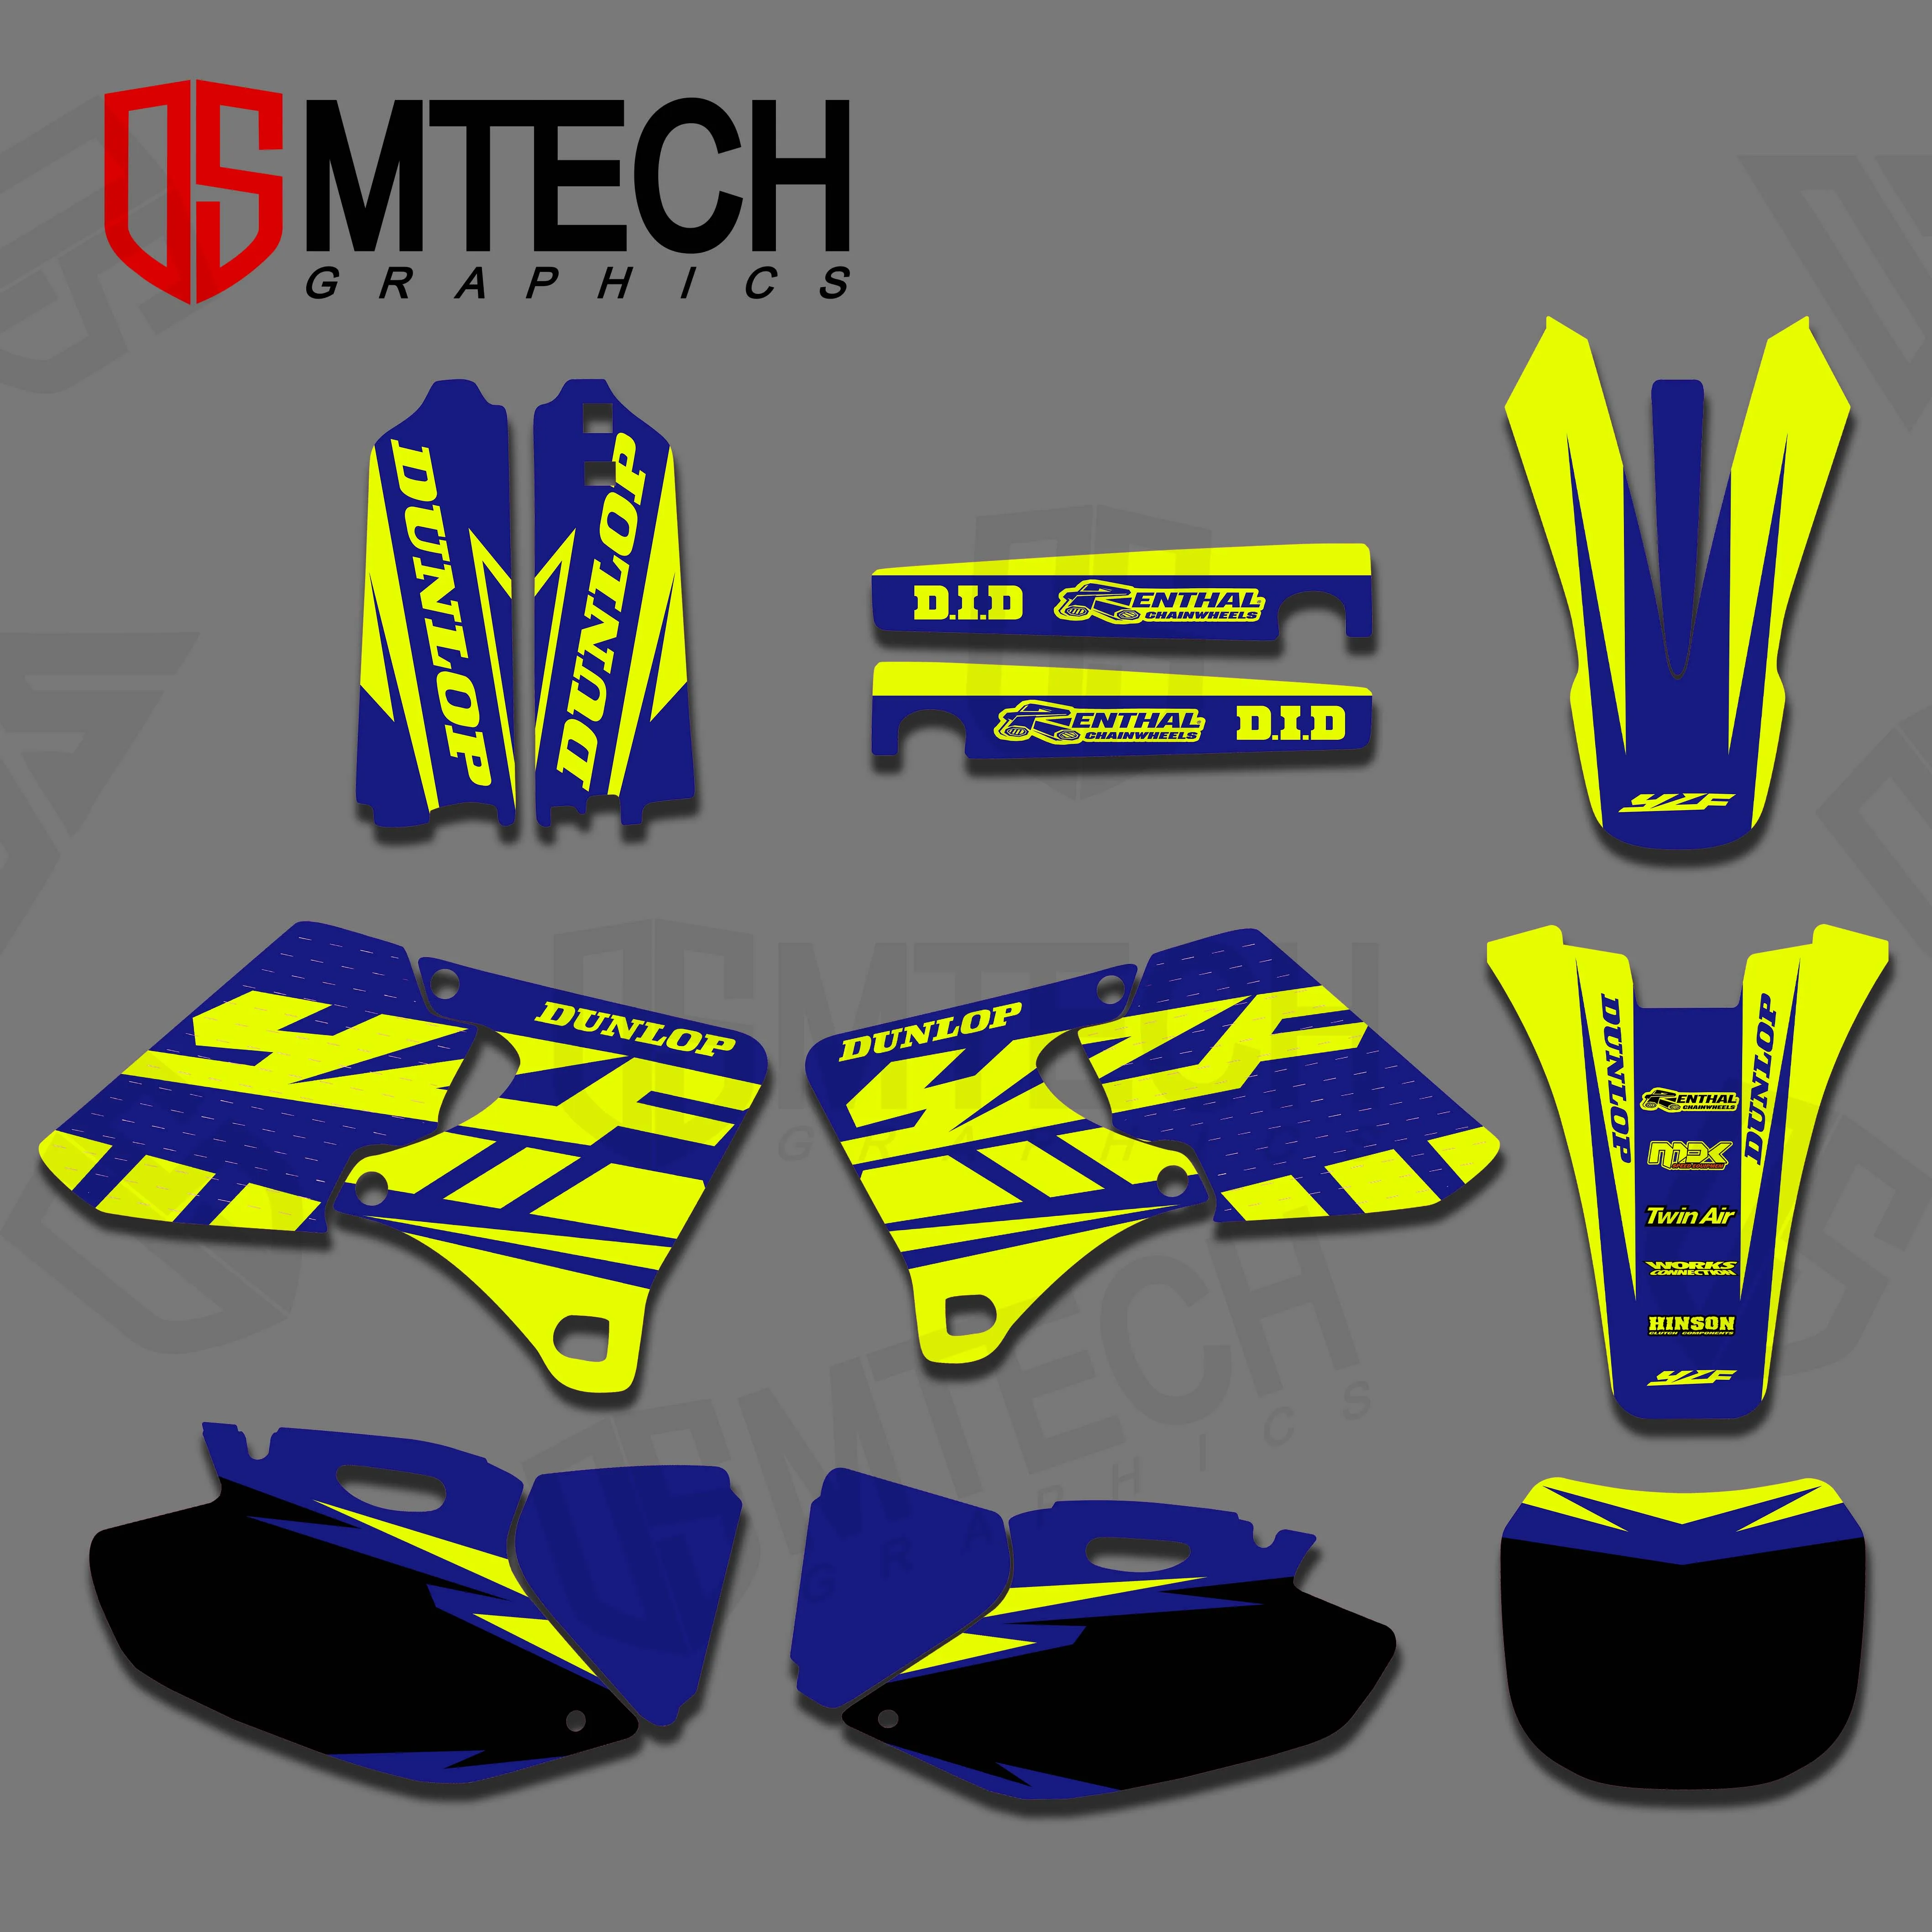 DSMTECH GRAPHICS & BACKGROUNDS DECALS STICKERS Kits for Yamaha YZ250F YZ400F YZ426F YZF 250F 400F 426F 1998 1999 2000 2001 2002 remtekey kobut1bt remote fob 3 button 315mhz for chevrolet gmc 1998 1999 2000 2001 2002